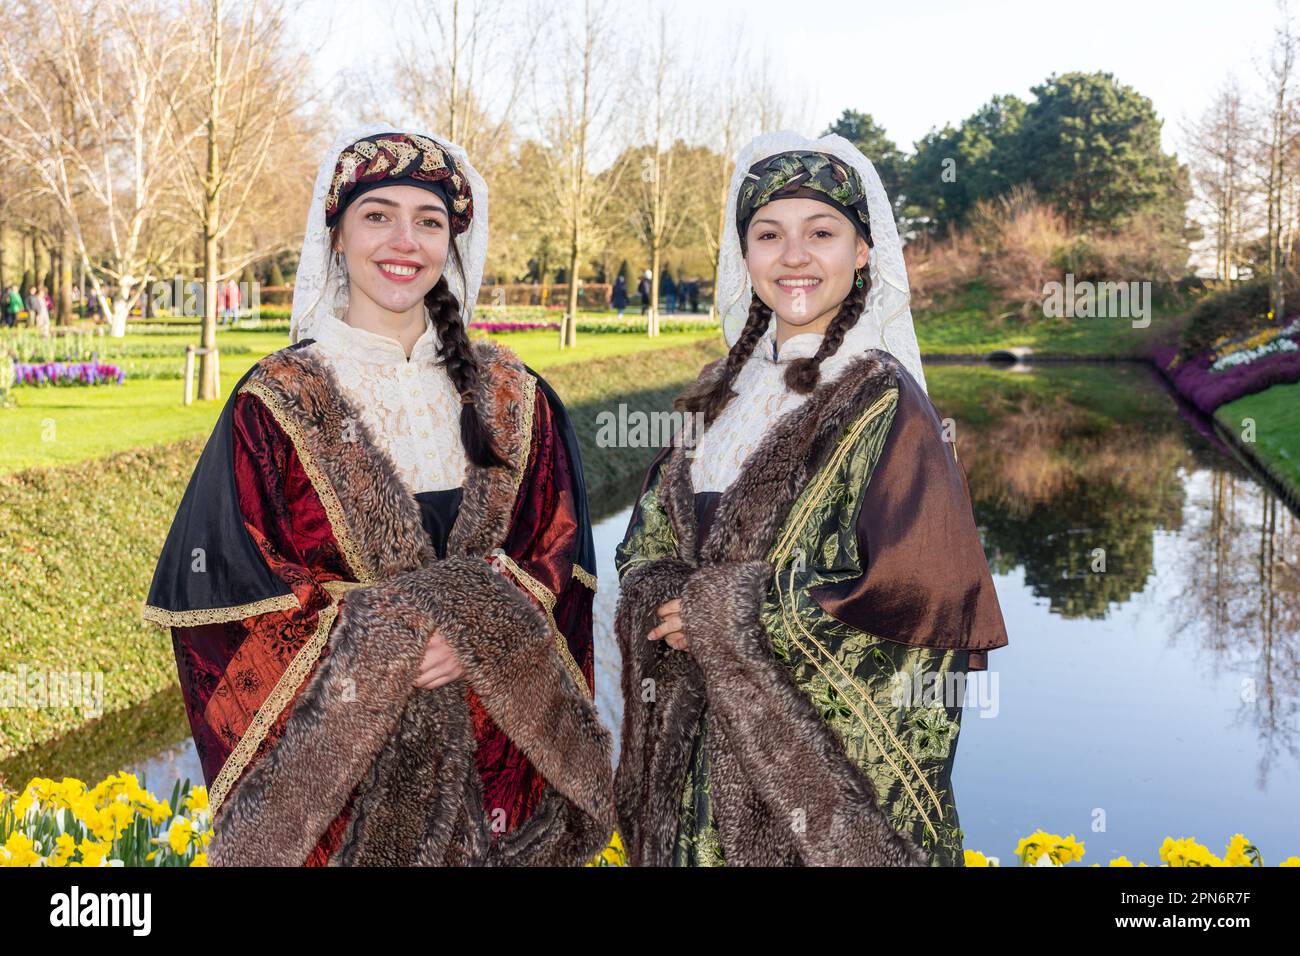 Young women in traditional costume at entrance, Keukenhof Gardens, Lisse, South Holland (Zuid-Holland), Kingdom of the Netherlands Stock Photo